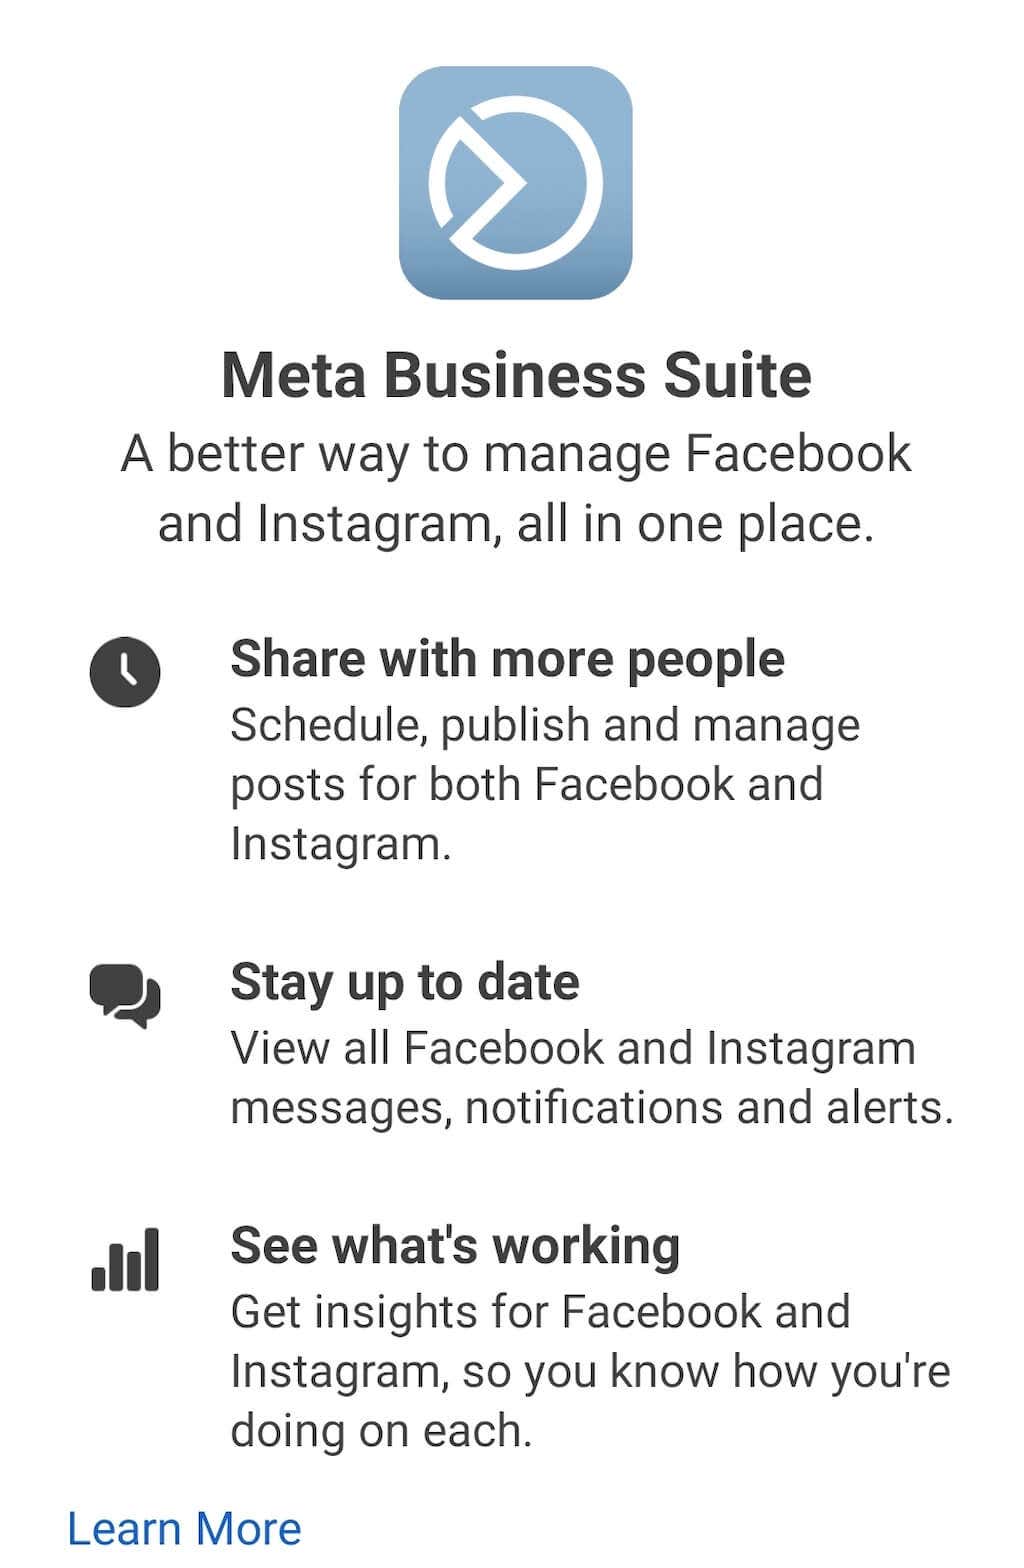 Facebook traffic down after using the meta business suite